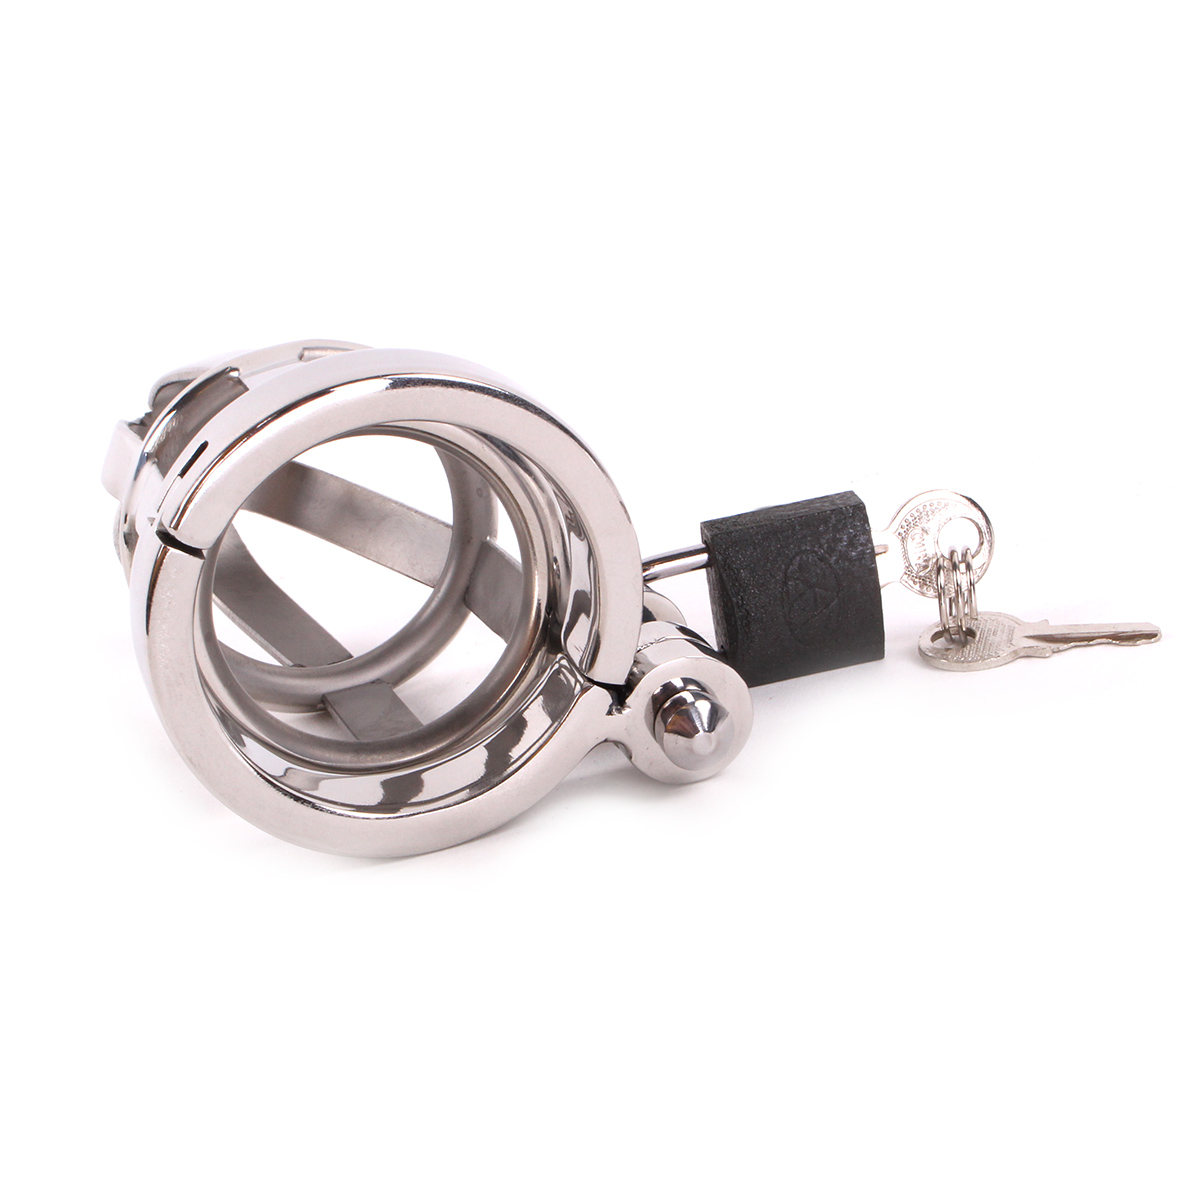 Chastity-Cage-DeLuxe-6.5-cm-OPR-277025-3